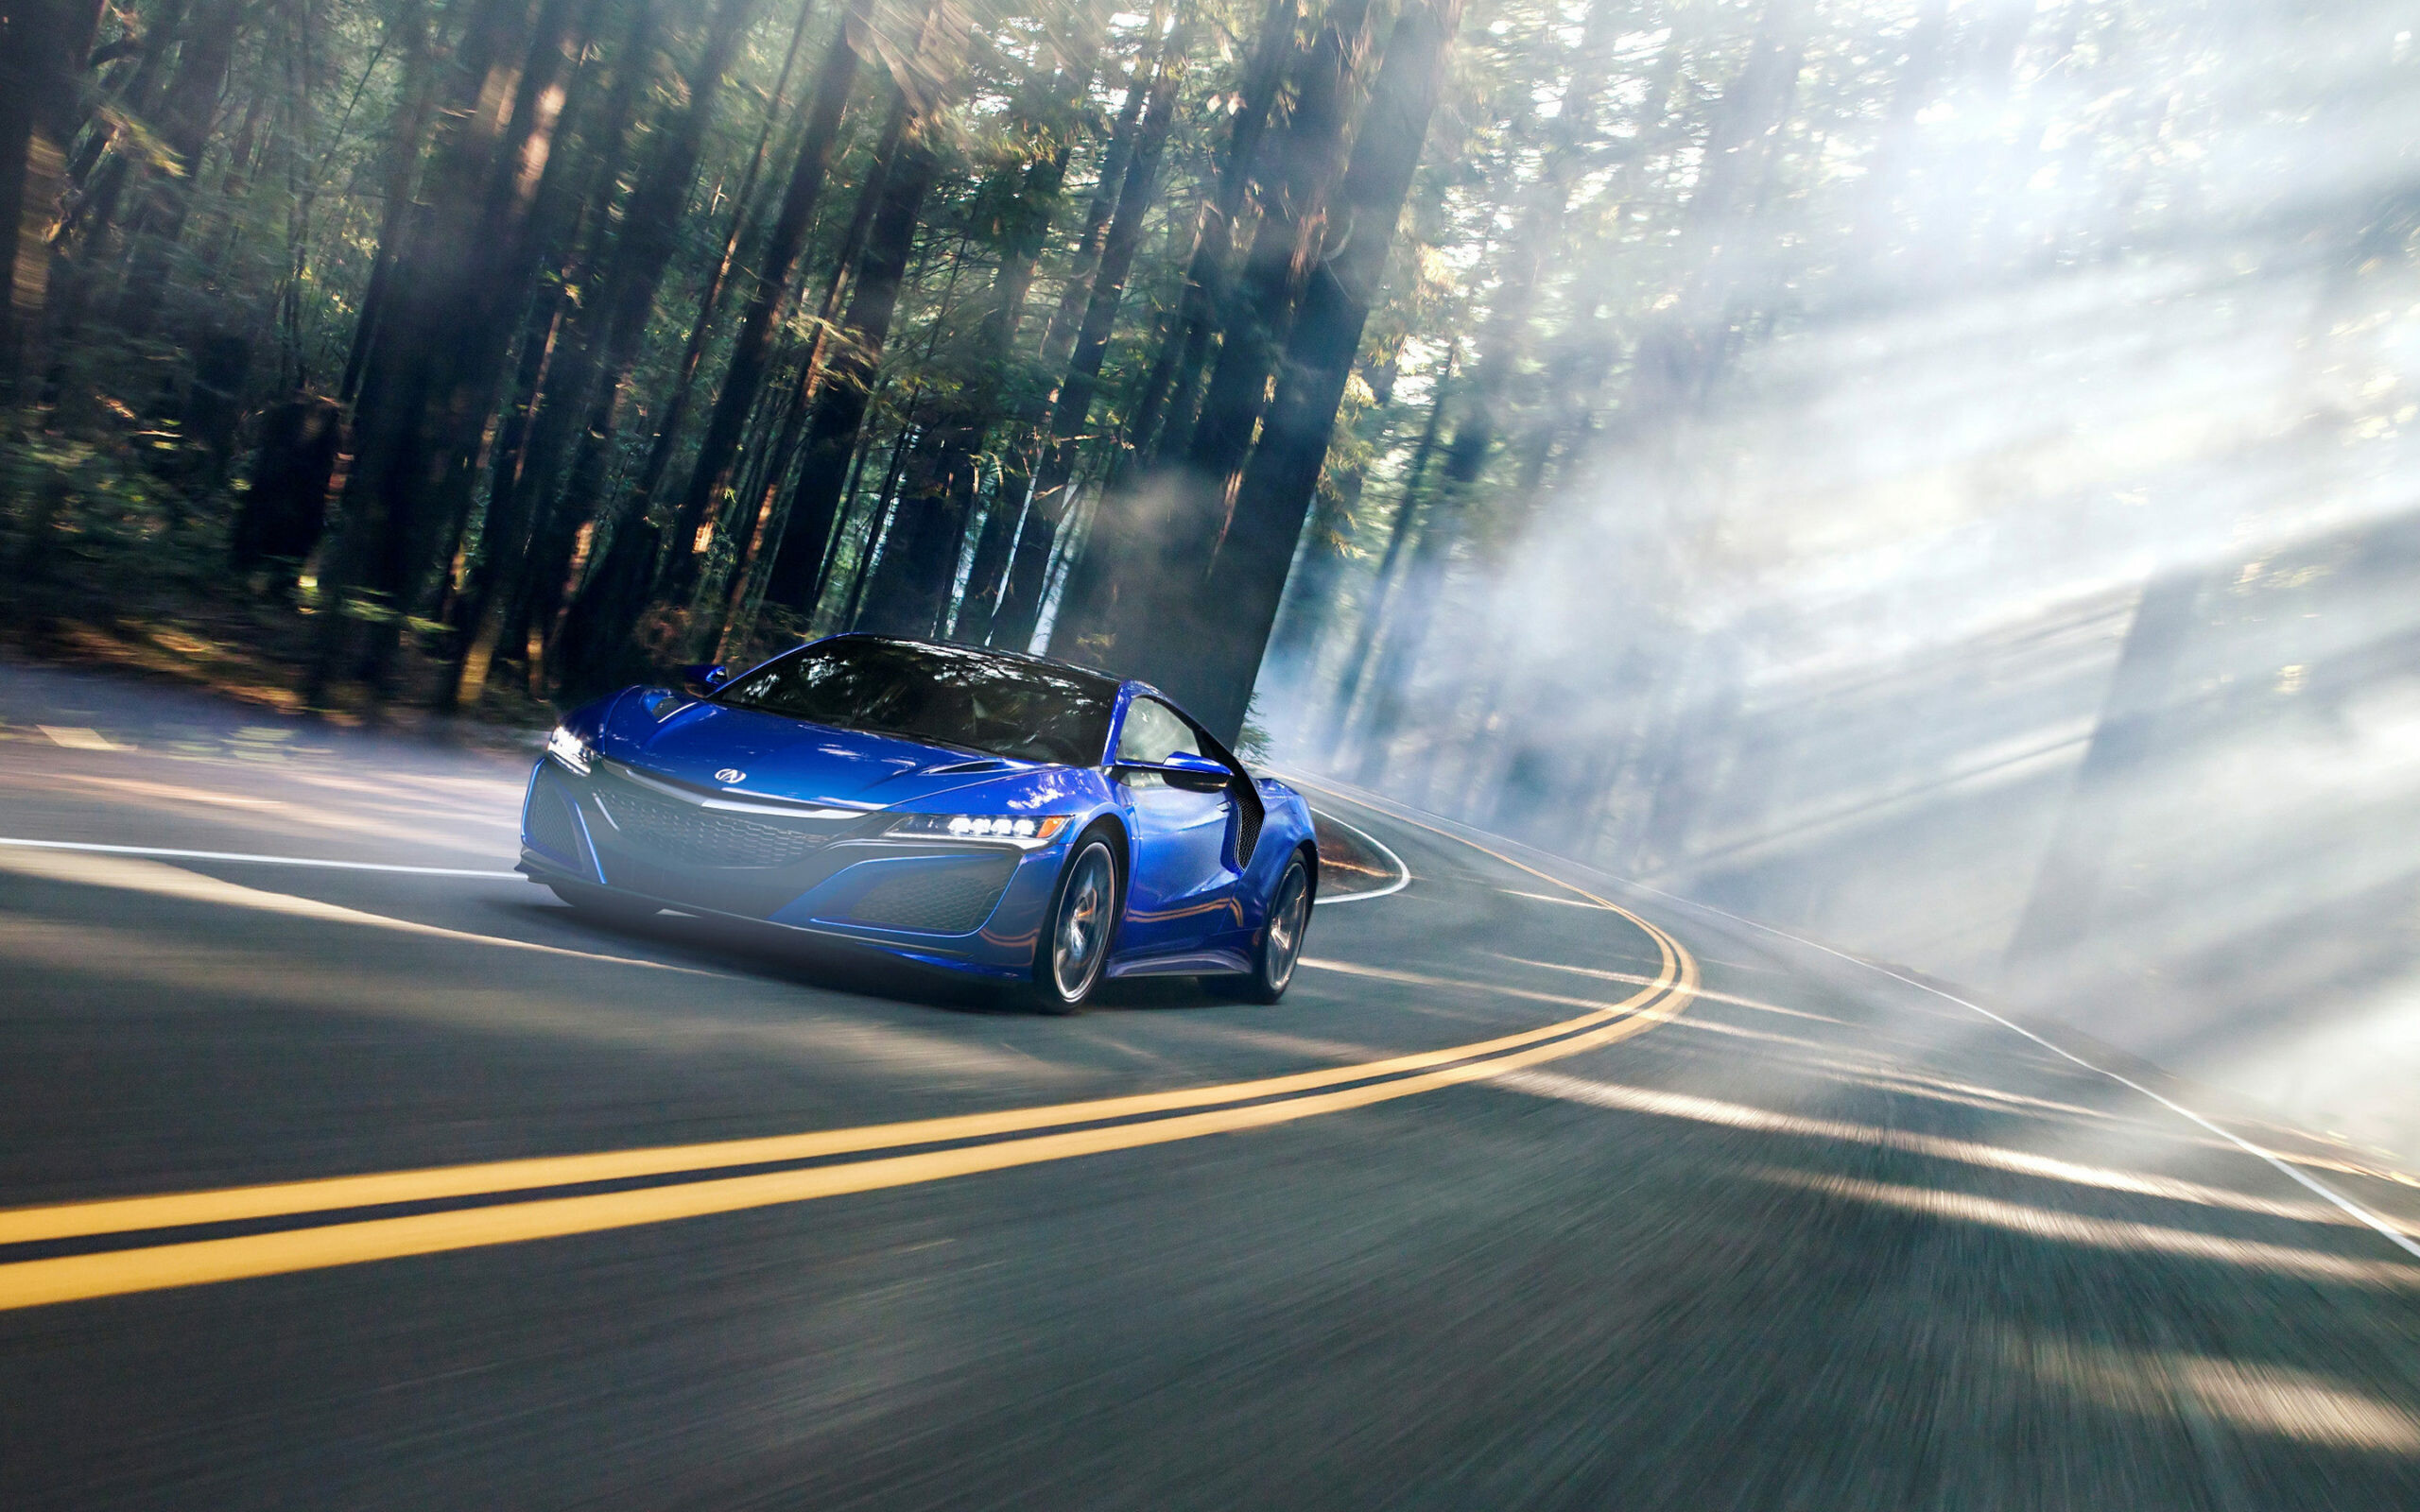 Acura: The brand launched in the United States and Canada on March 27, 1986, NSX. 2560x1600 HD Wallpaper.